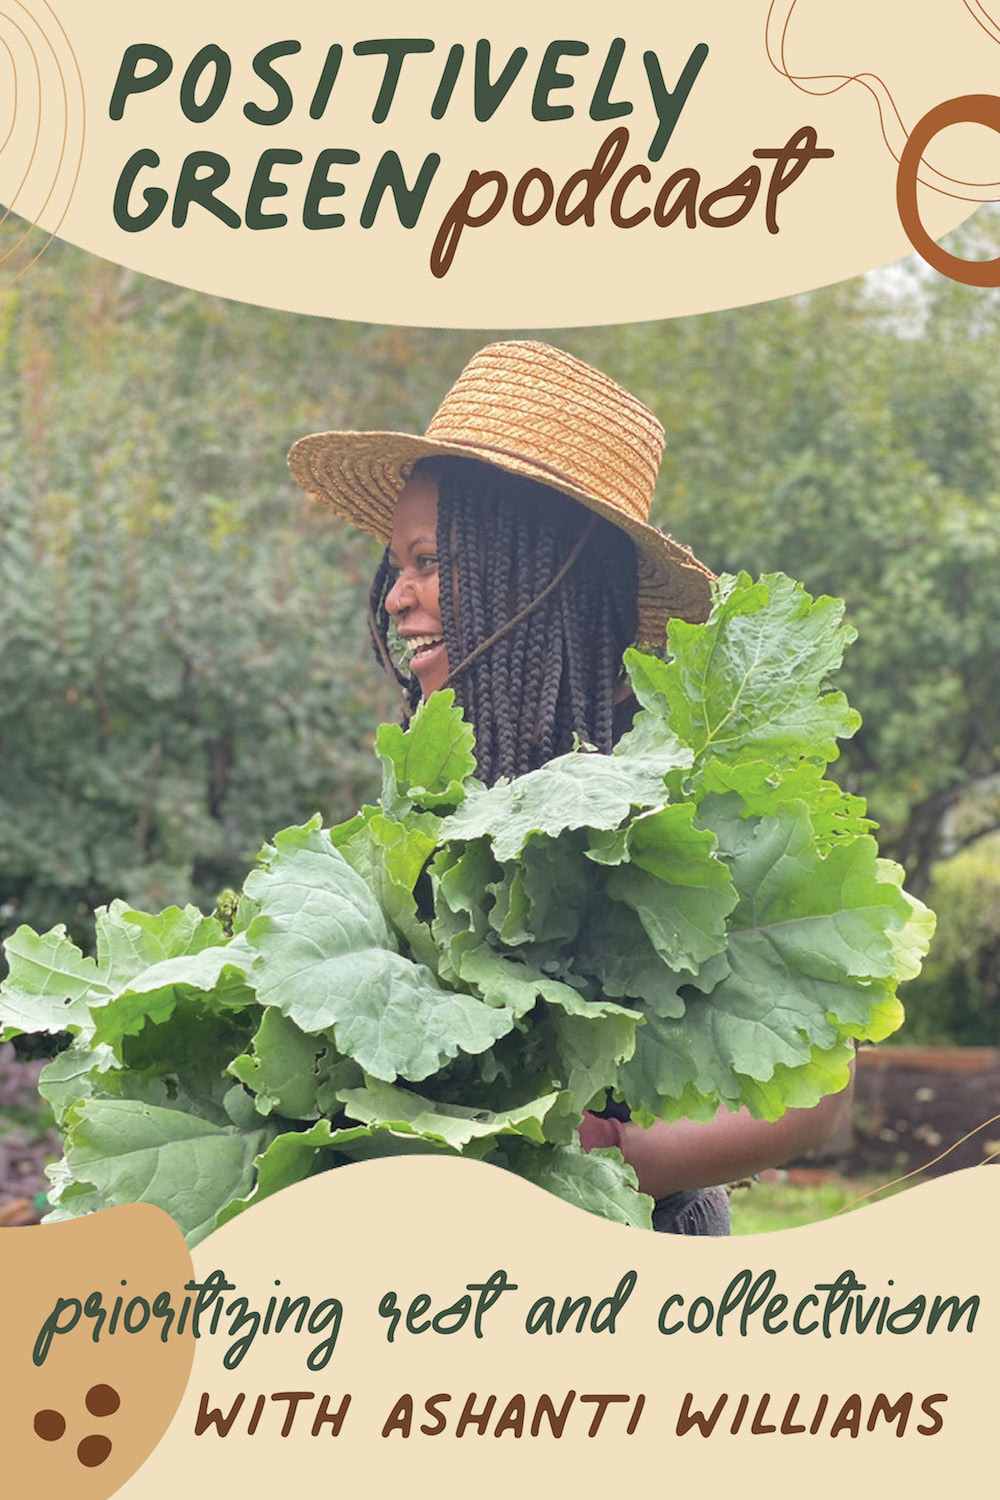 Priortizing rest and collectivism with Ashanti Williams of Blackyard Farm